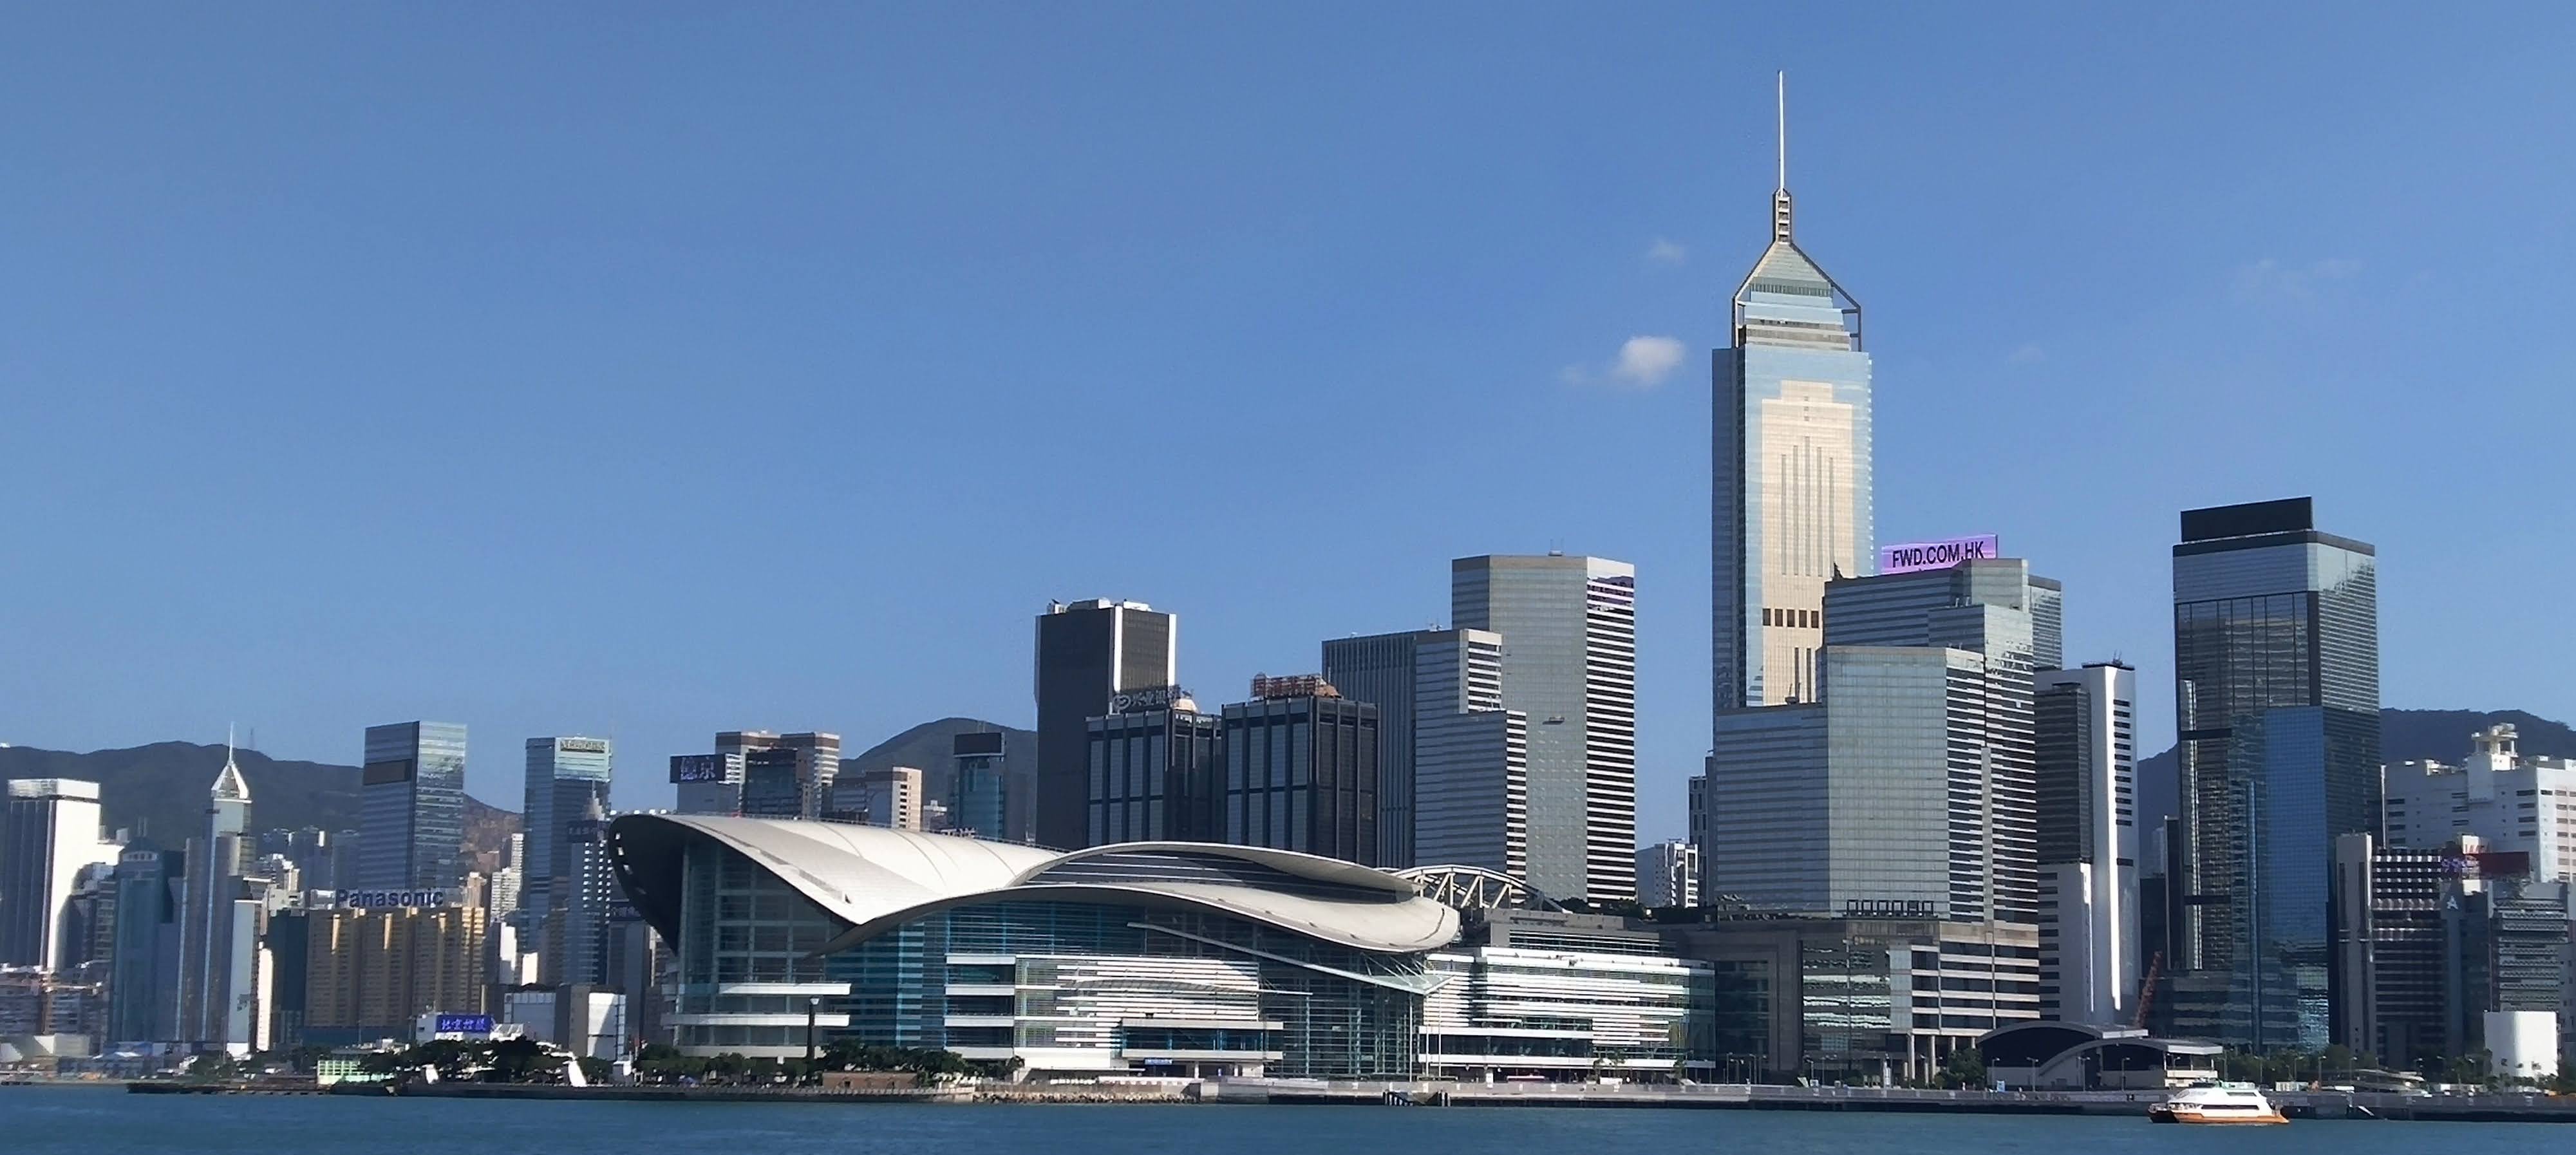 Great Hong Kong Convention Center and Central Plaza from the ferry